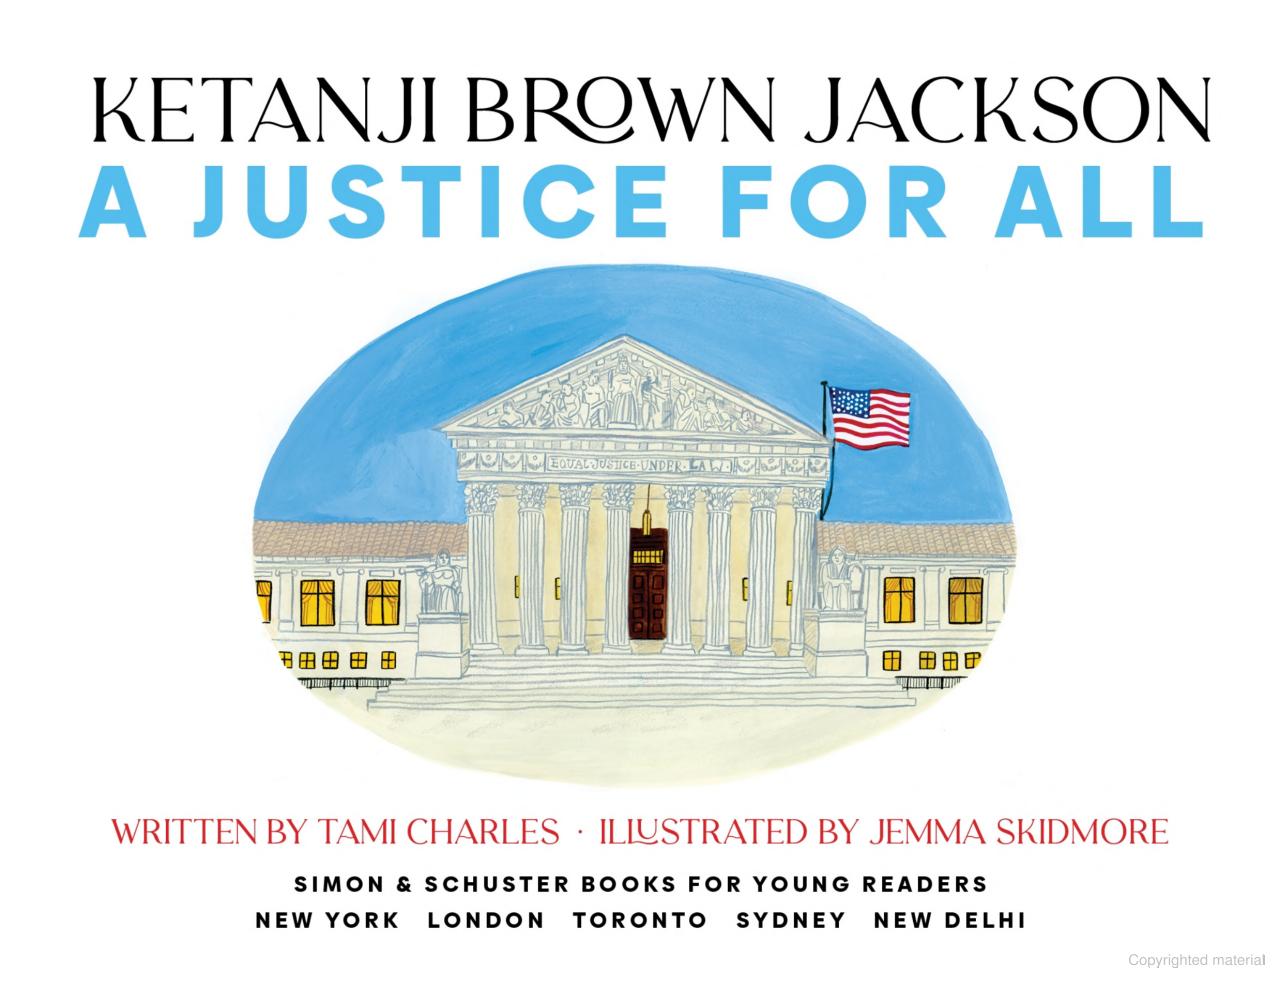 Ketanji Brown Jackson: A Justice for All